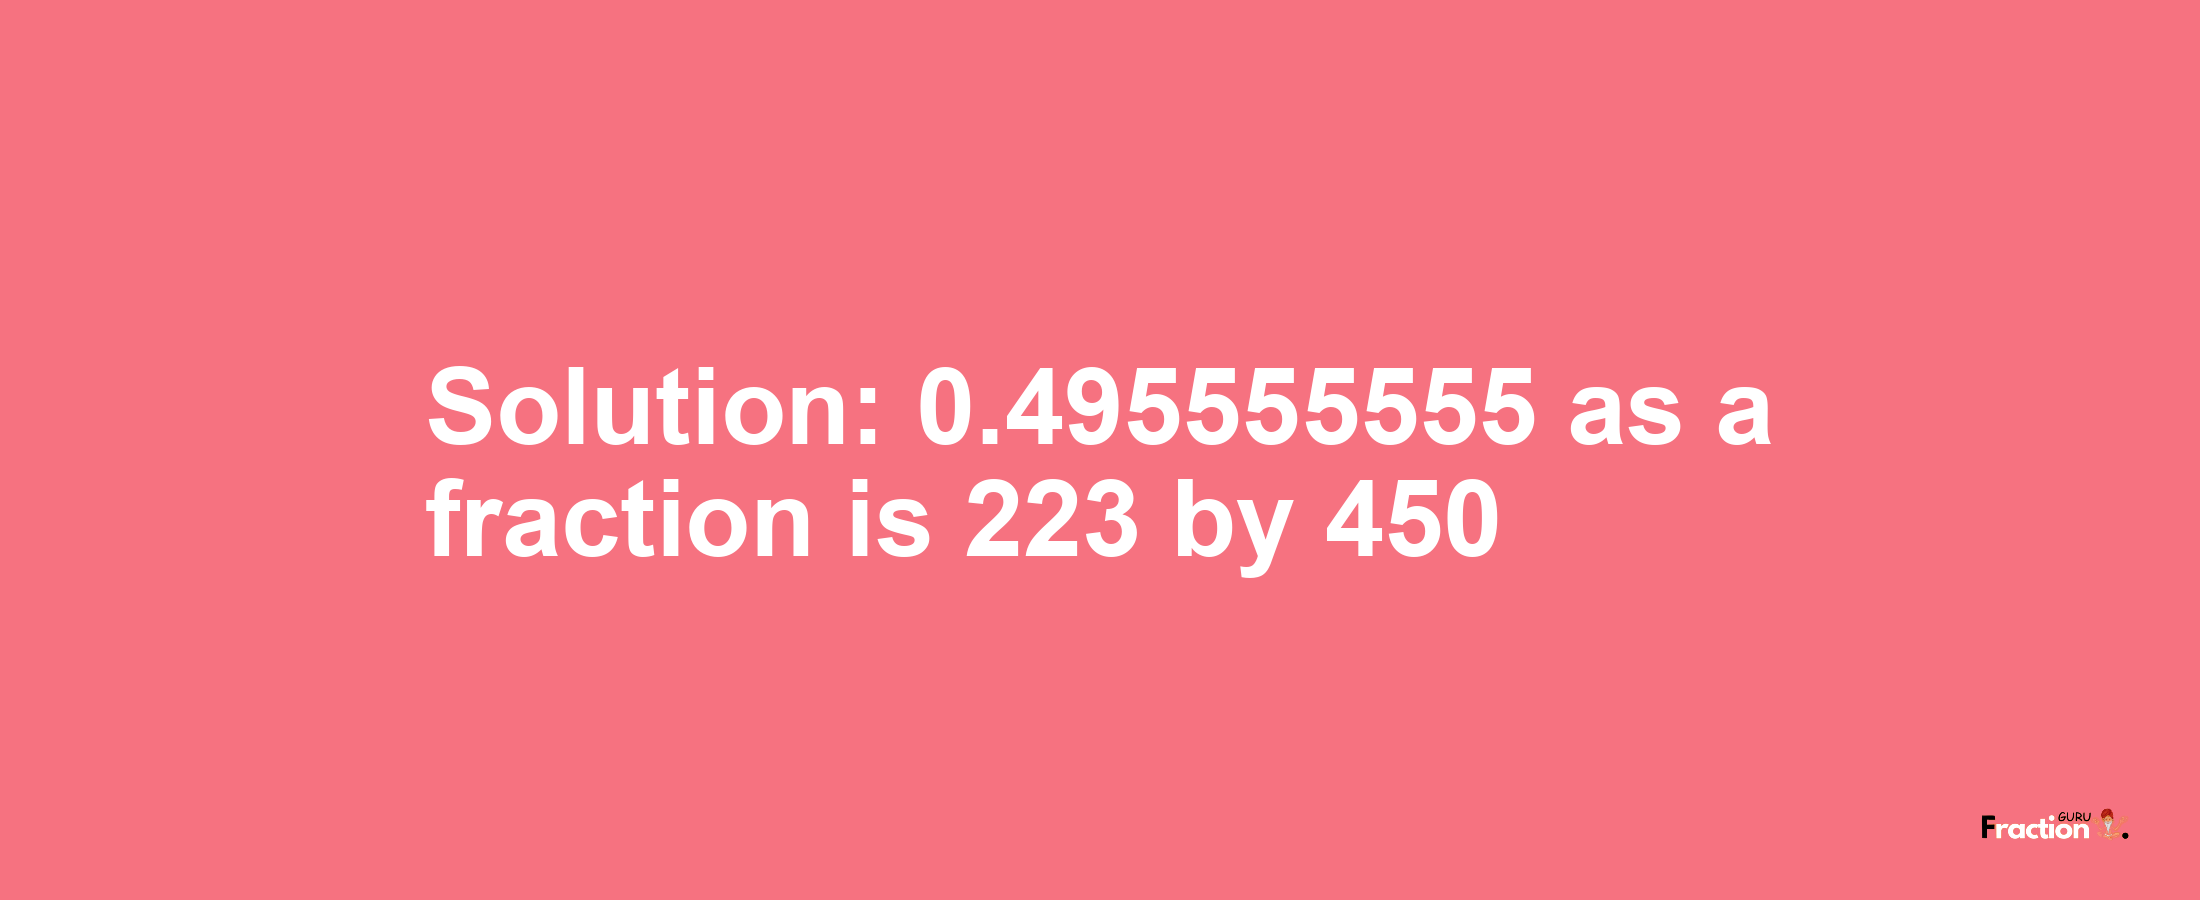 Solution:0.495555555 as a fraction is 223/450